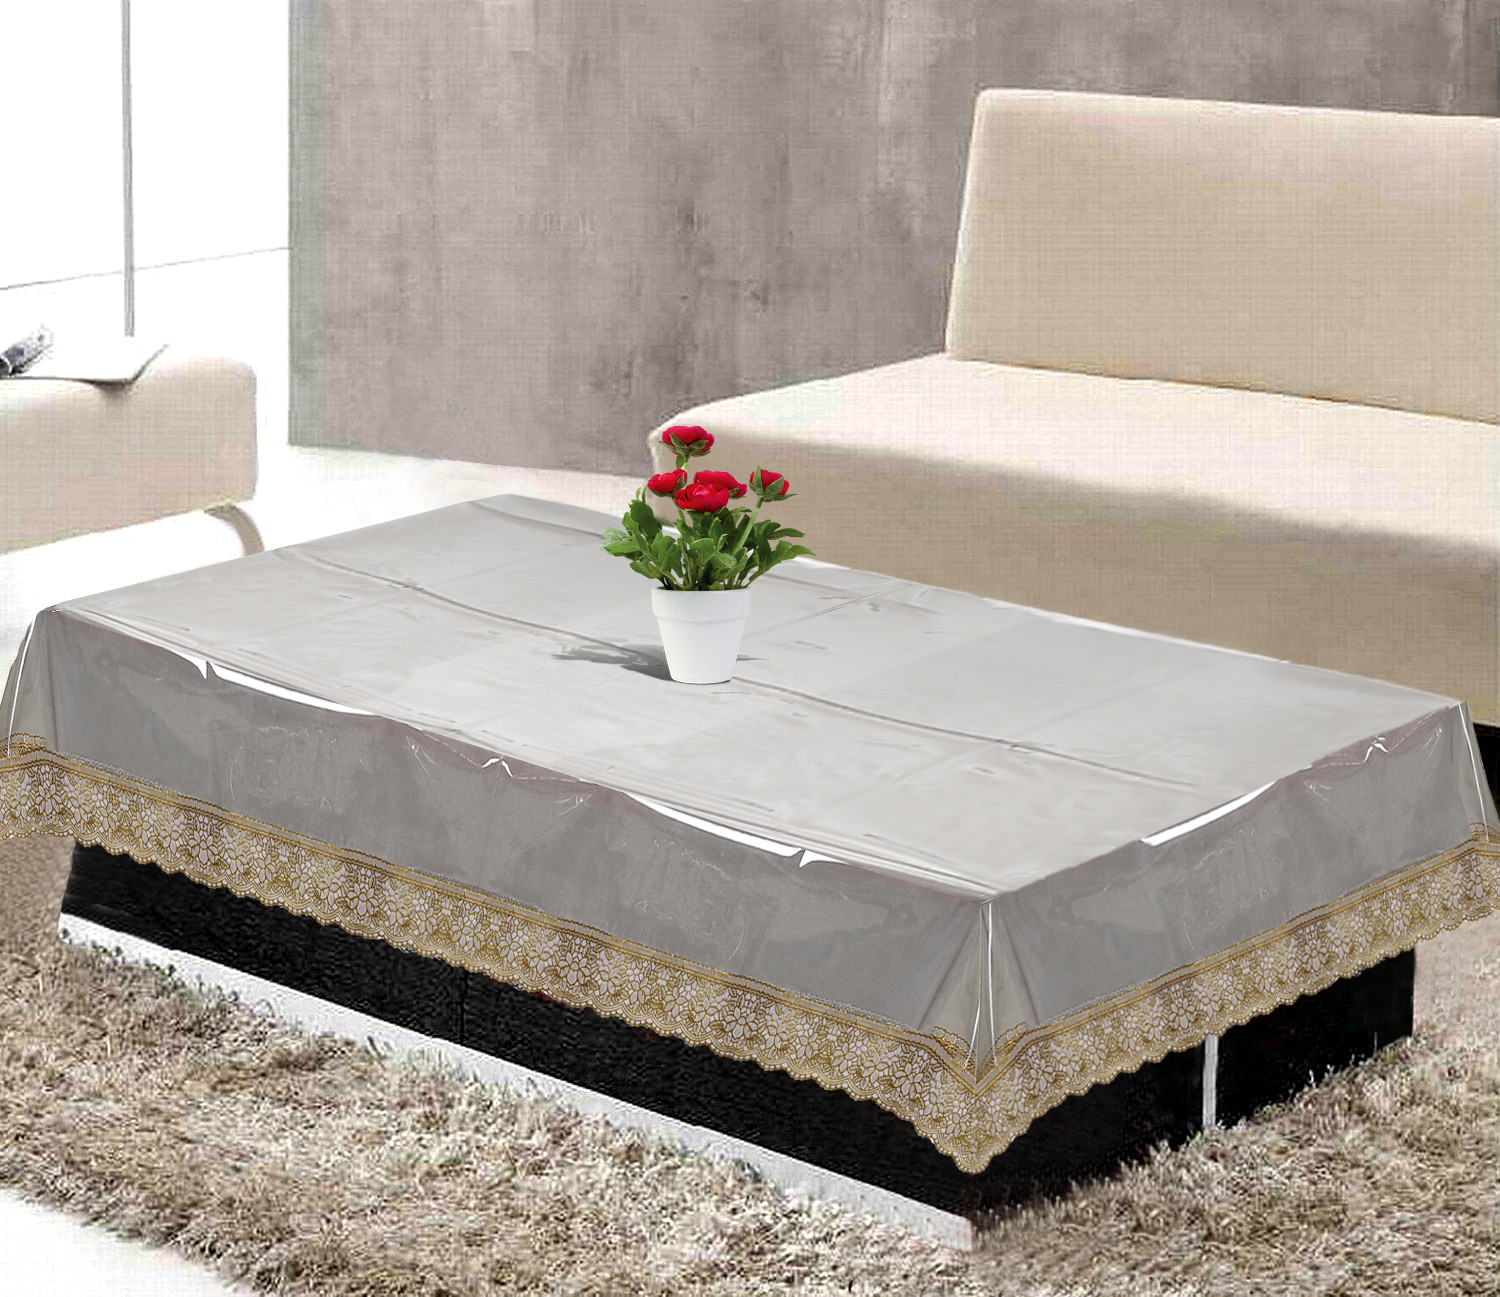 Kuber Industries PVC 4 Seater Center Table Cover With Gold Lace Border 40